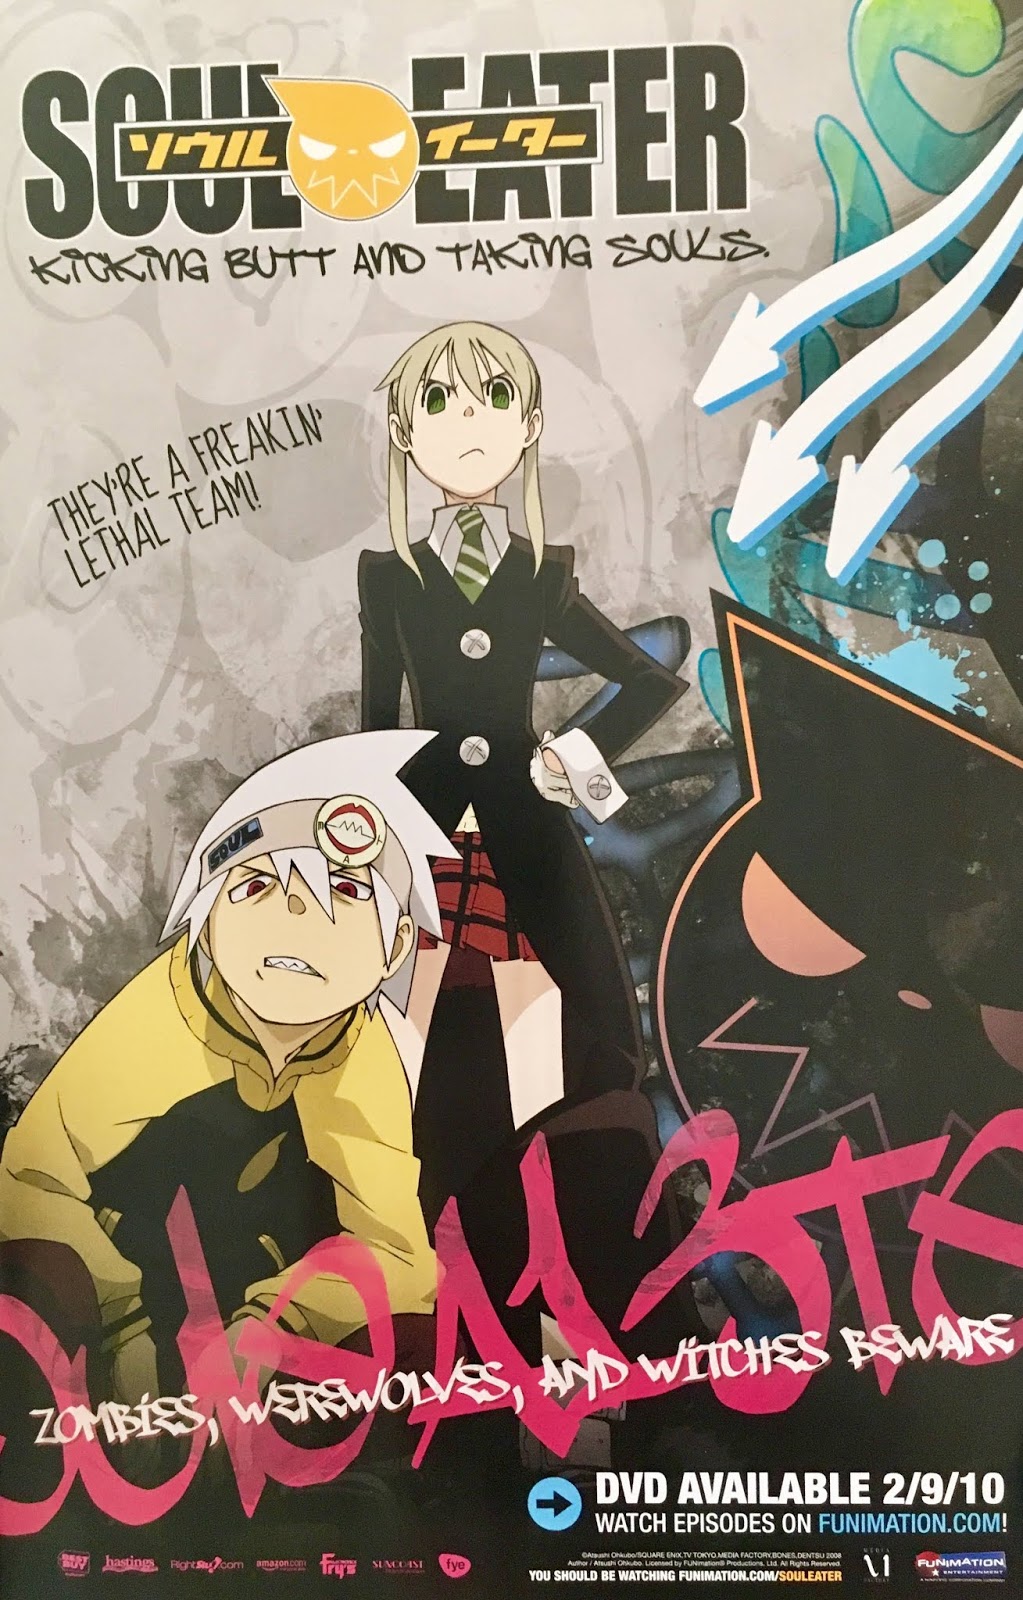 FUNimation Adds Soul Eater Anime from Media Factory (Update 2